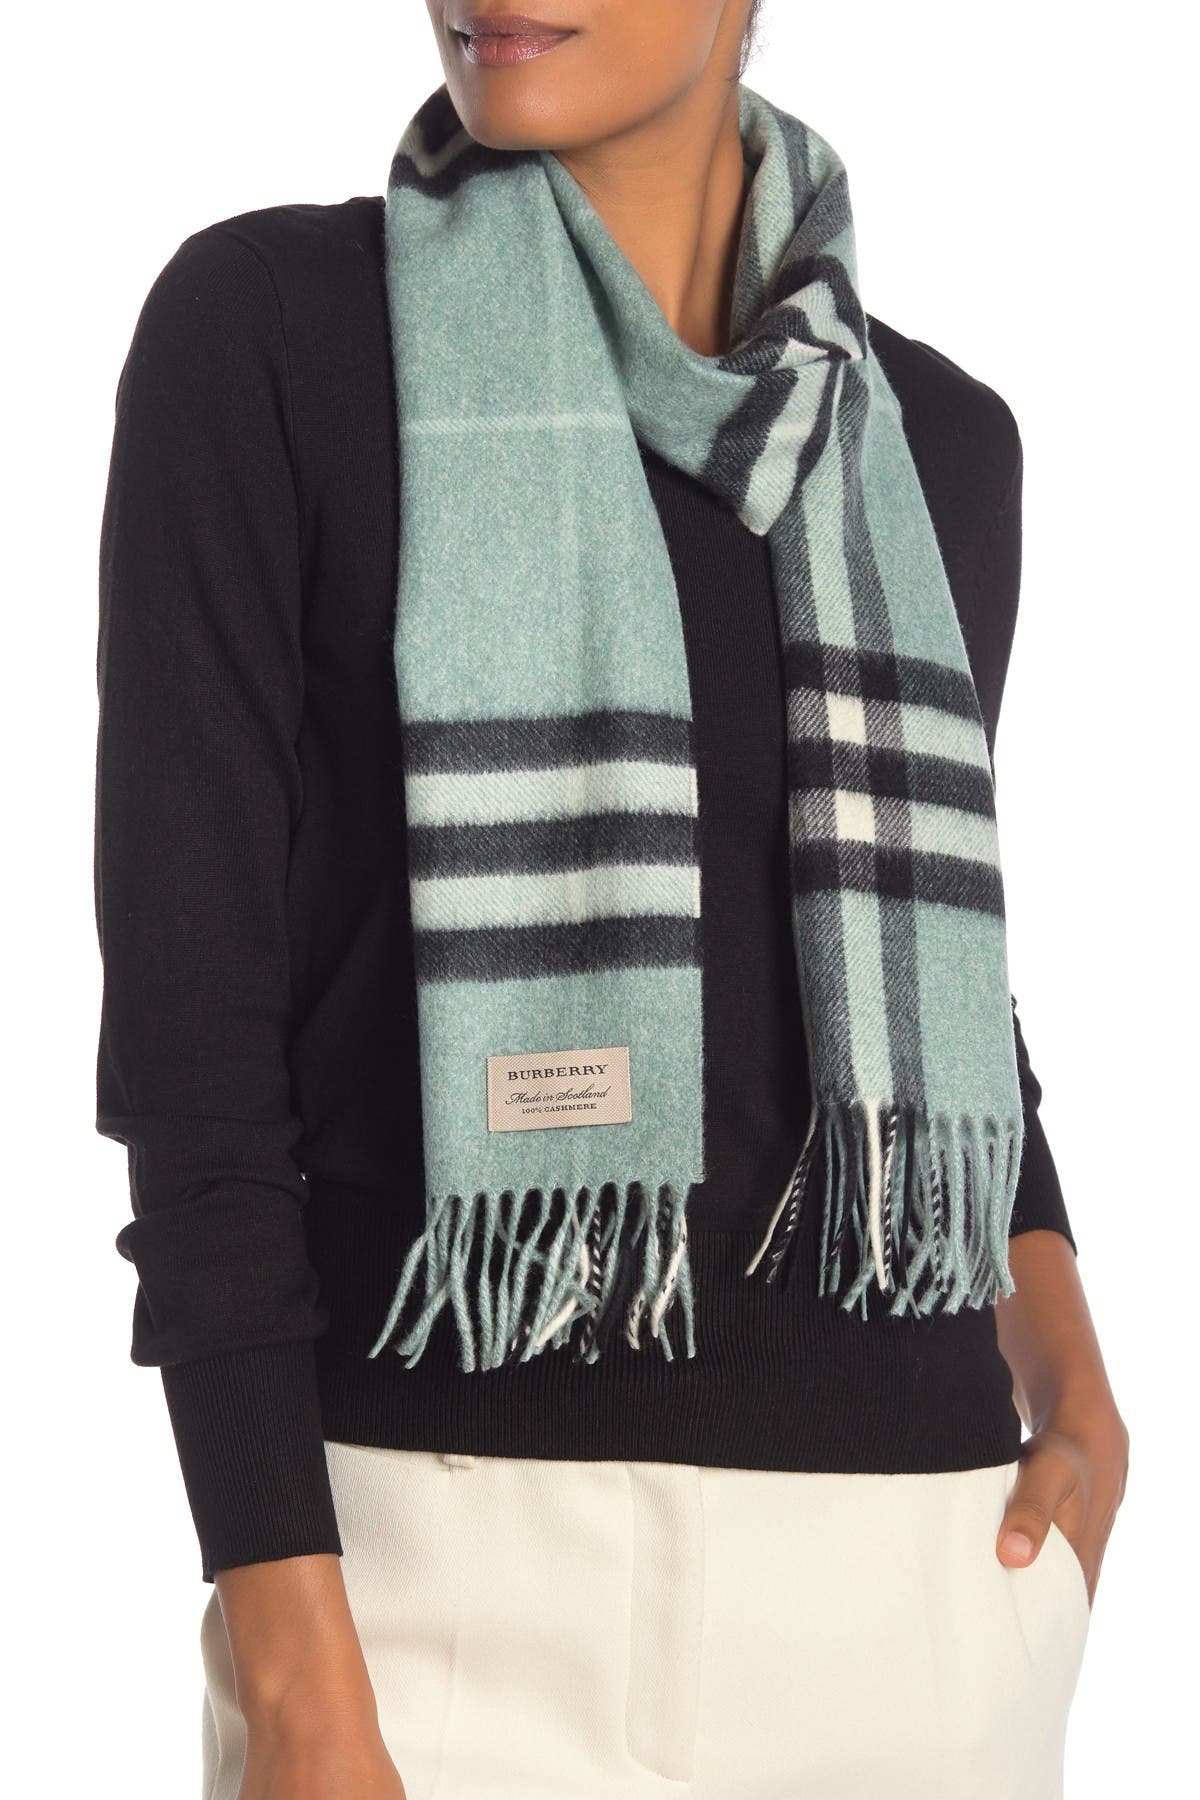 Burberry | Giant Check Cashmere Scarf 